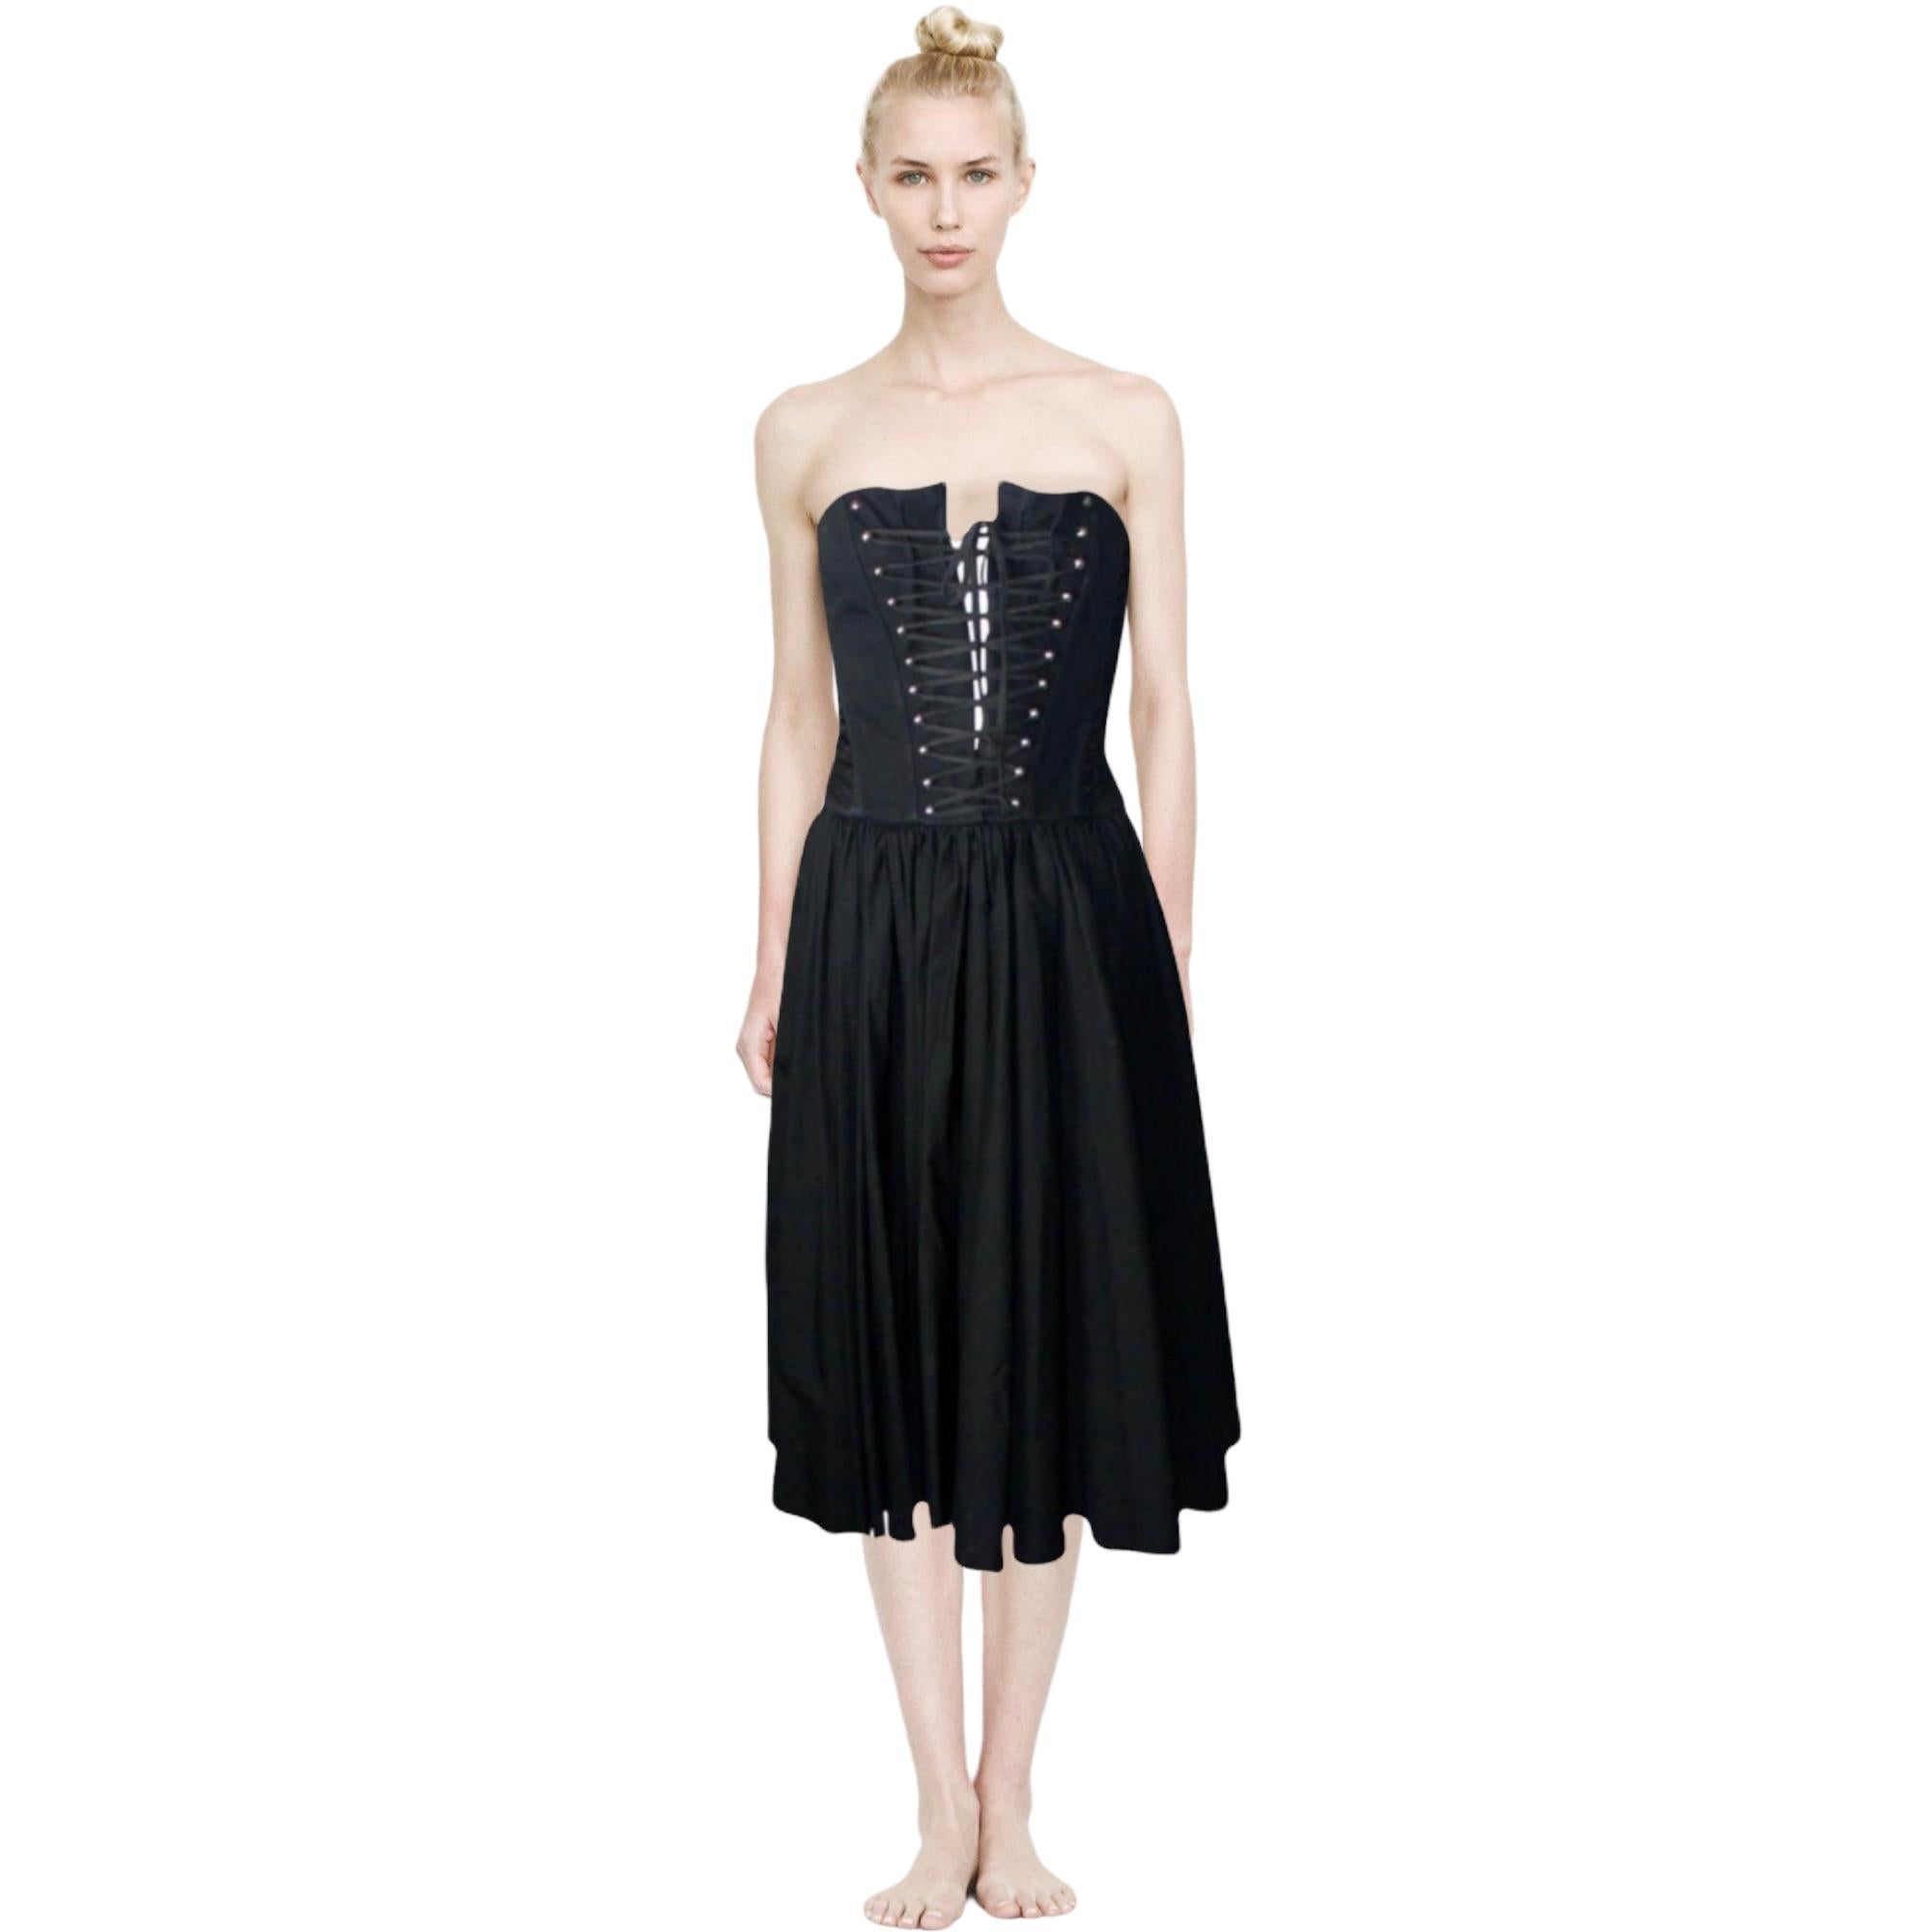 DOLCE & GABBANA Black Hourglass Boned Corset Lace Up Dress 42 For Sale 6